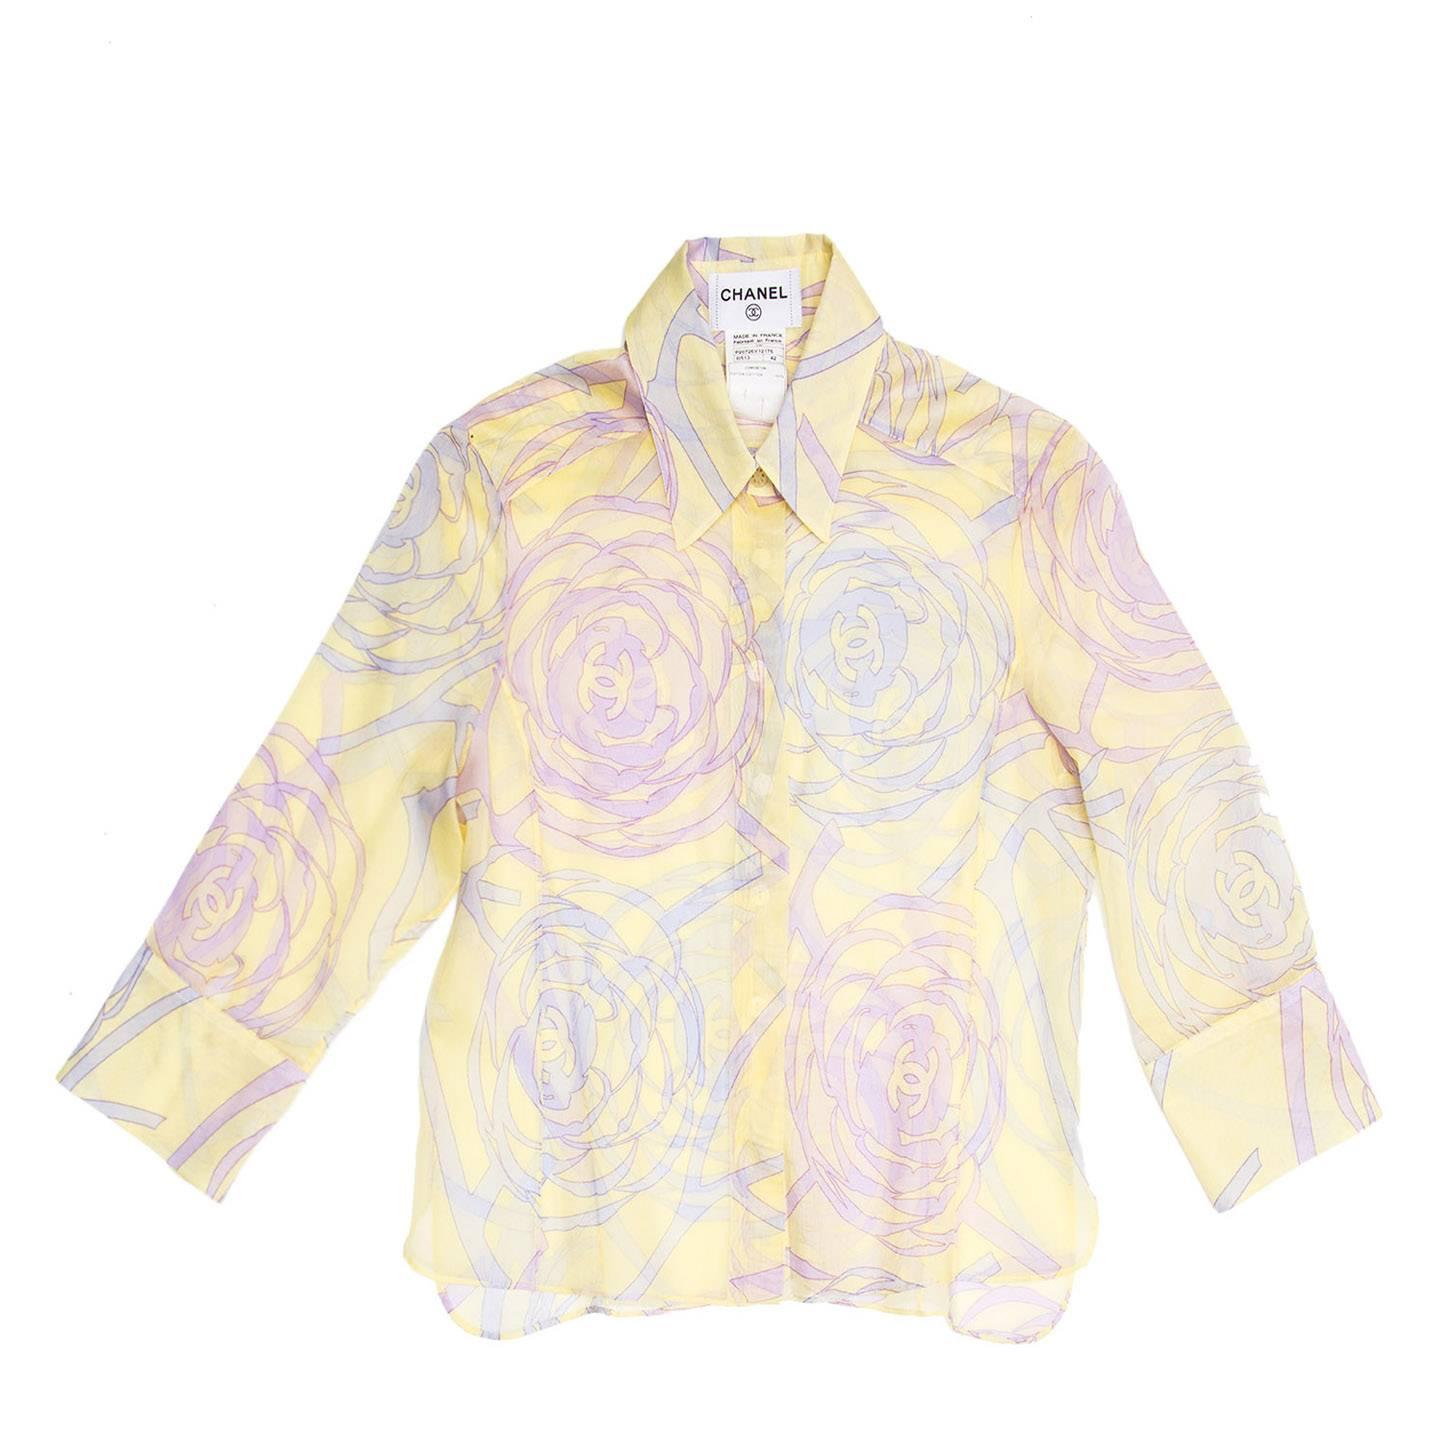 Yellow sheer cotton short shirt with purple and violet geometric floral print with Chanel logos. The sleeves are 3/4 length that fasten with beautiful mother-of-pearl floral cufflinks, the hem is straight with vents at sides. 
Made in France.

Size 